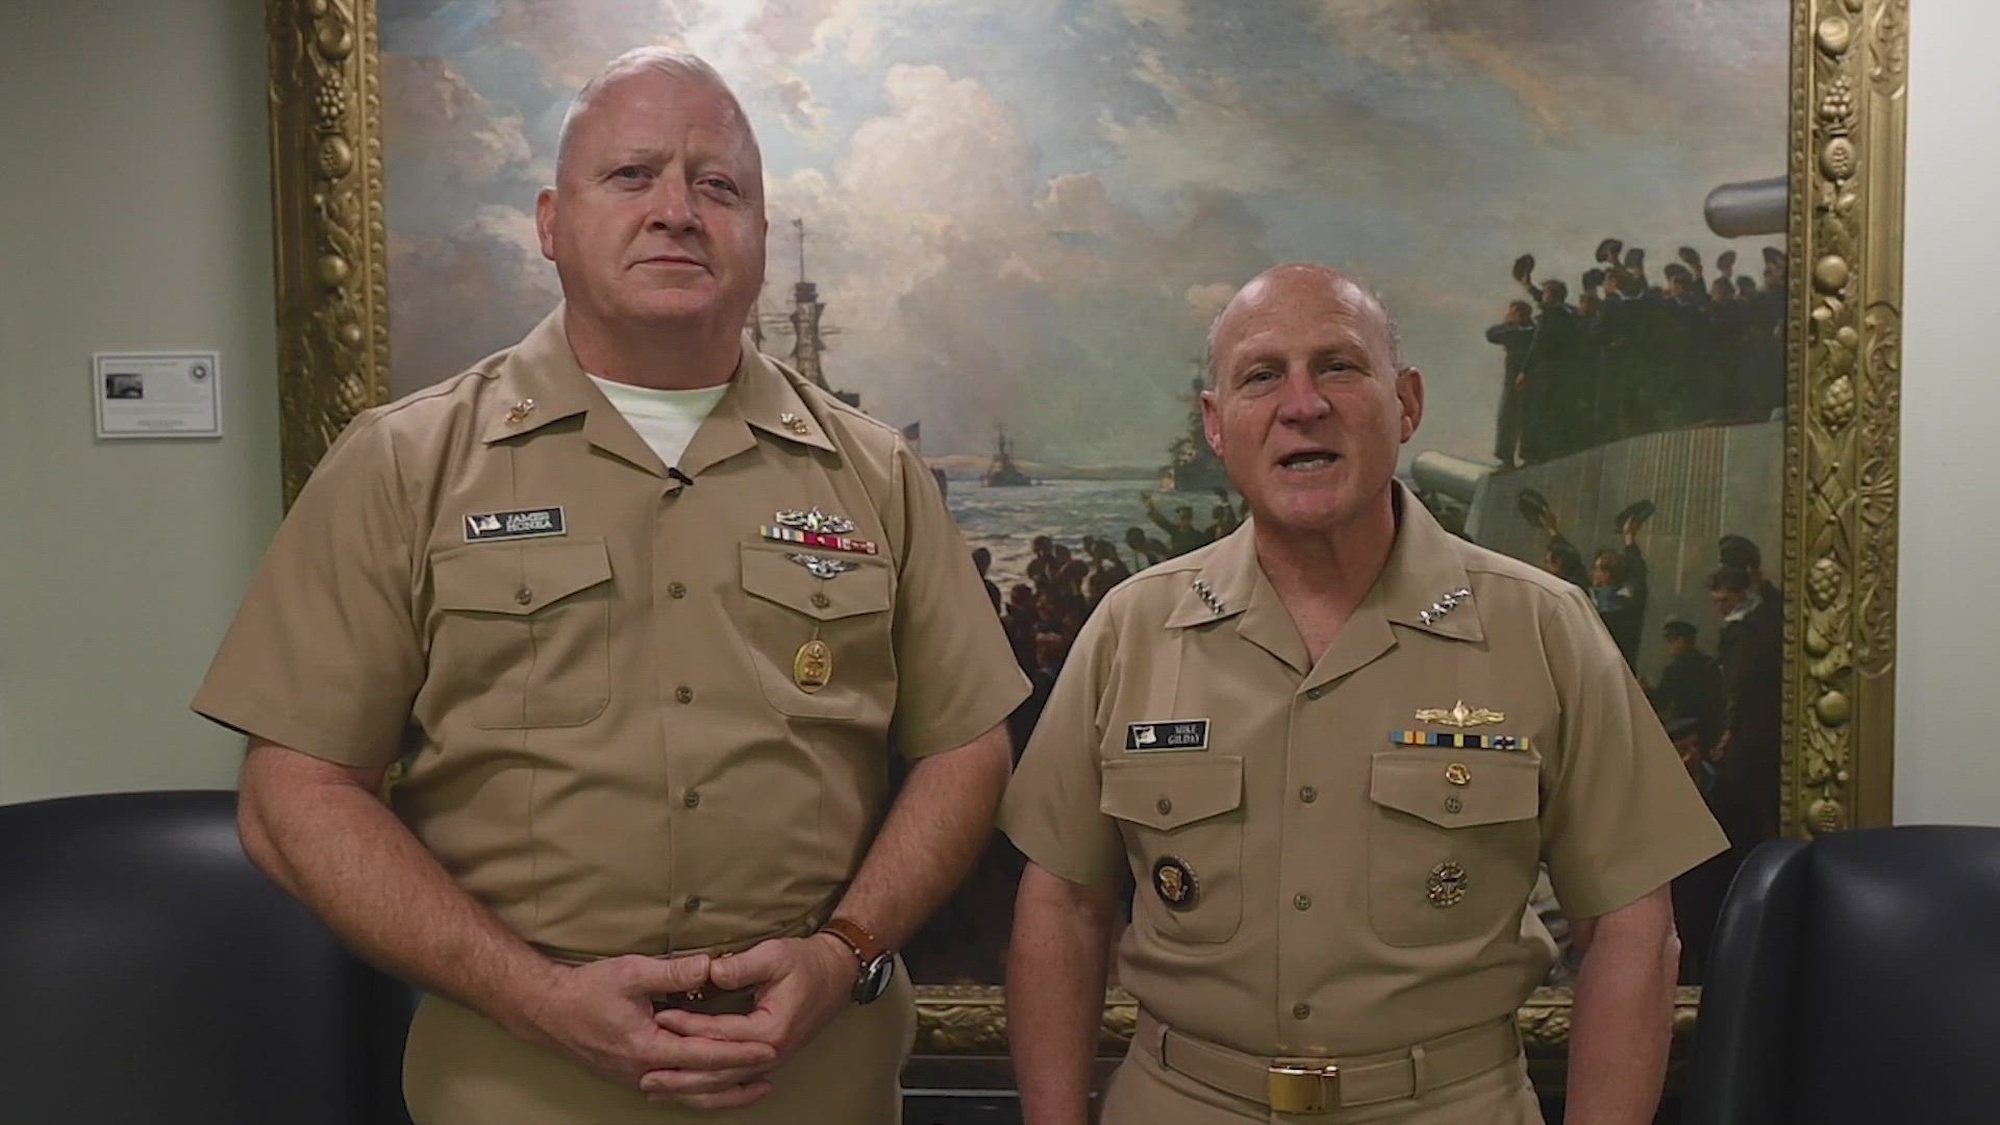 Chief of Naval Operations Adm. Mike Gilday and Master Chief Petty Officer of the Navy James Honea wish the Navy a Happy 247th Birthday. This year's theme is on watch 24/7 for 247 years. (U.S. Navy video by Mass Communication Specialist 1st Class Michael B Zingaro/released)